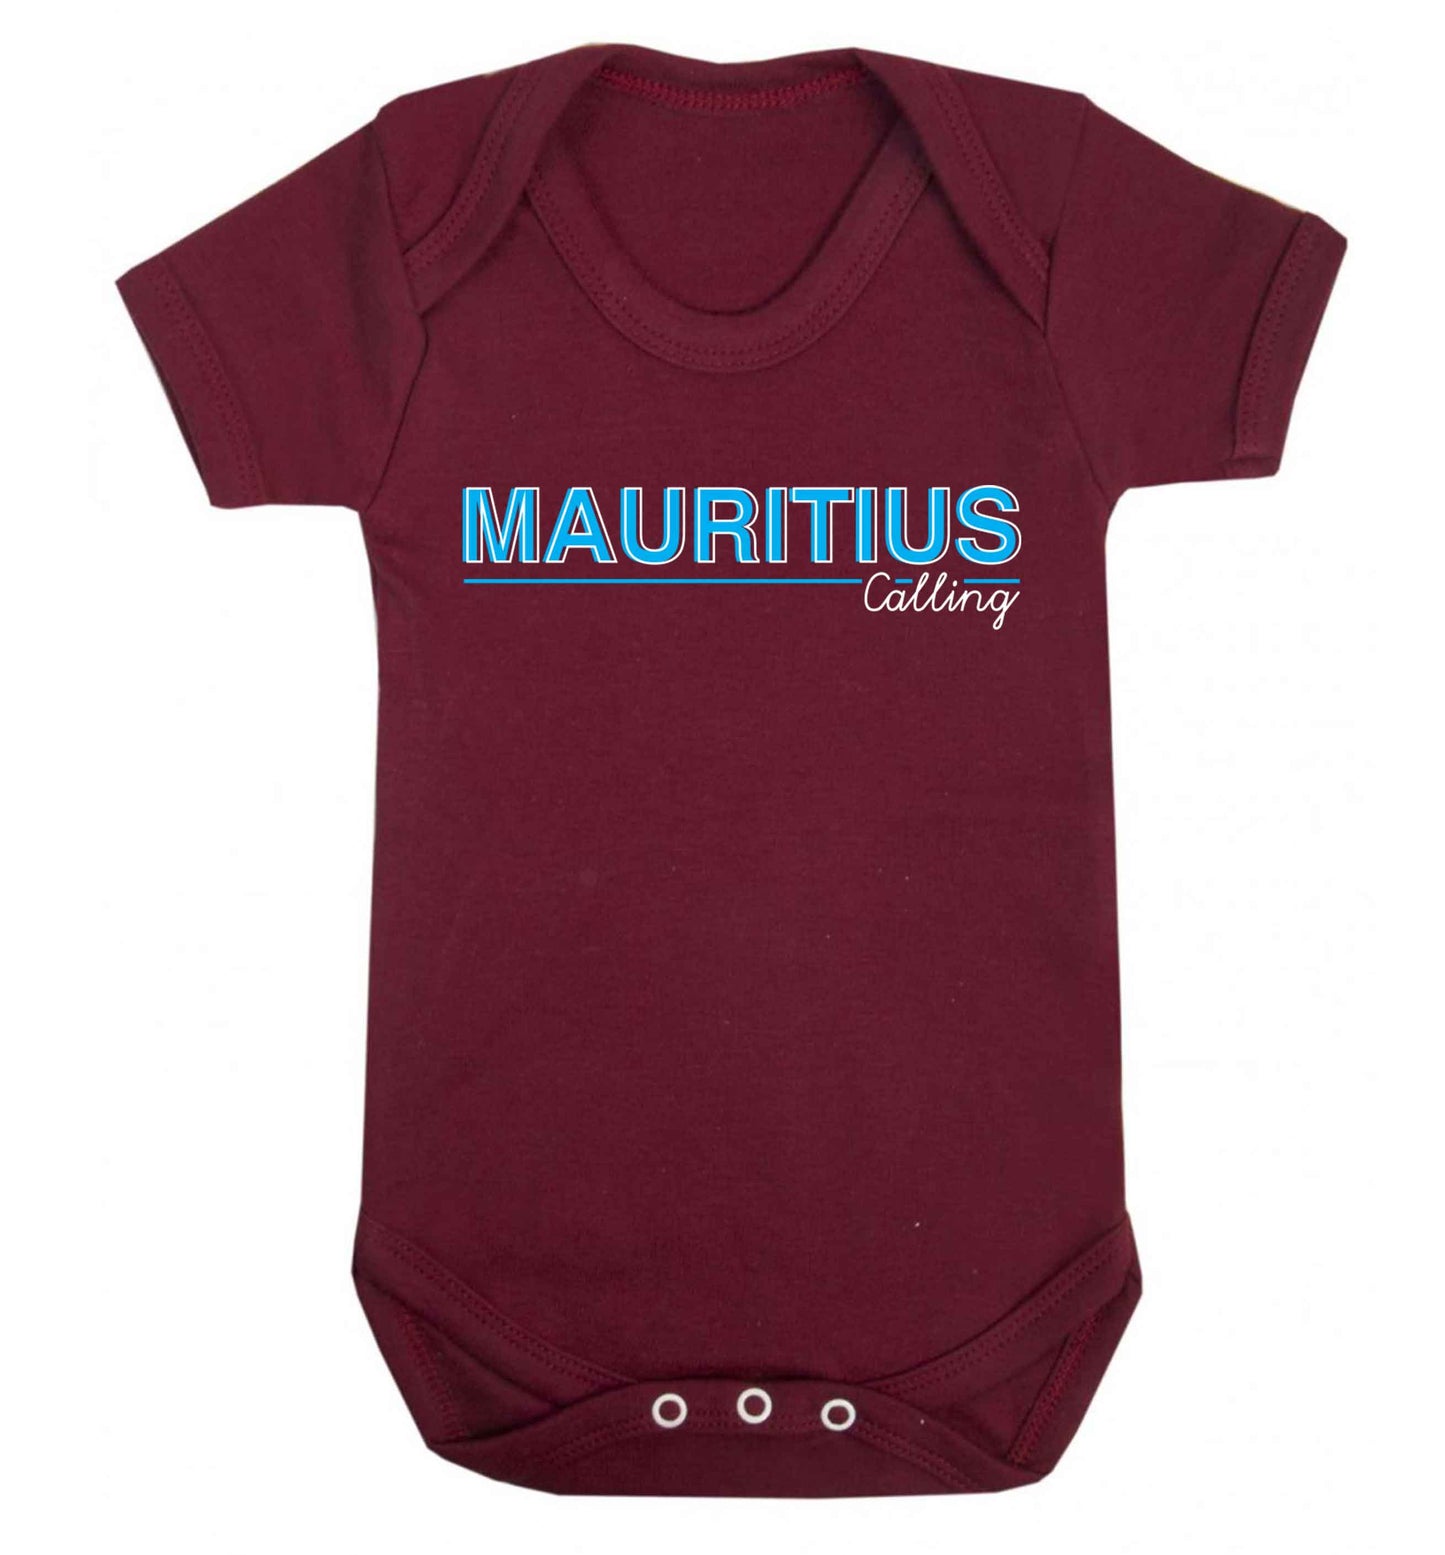 Mauritius calling Baby Vest maroon 18-24 months